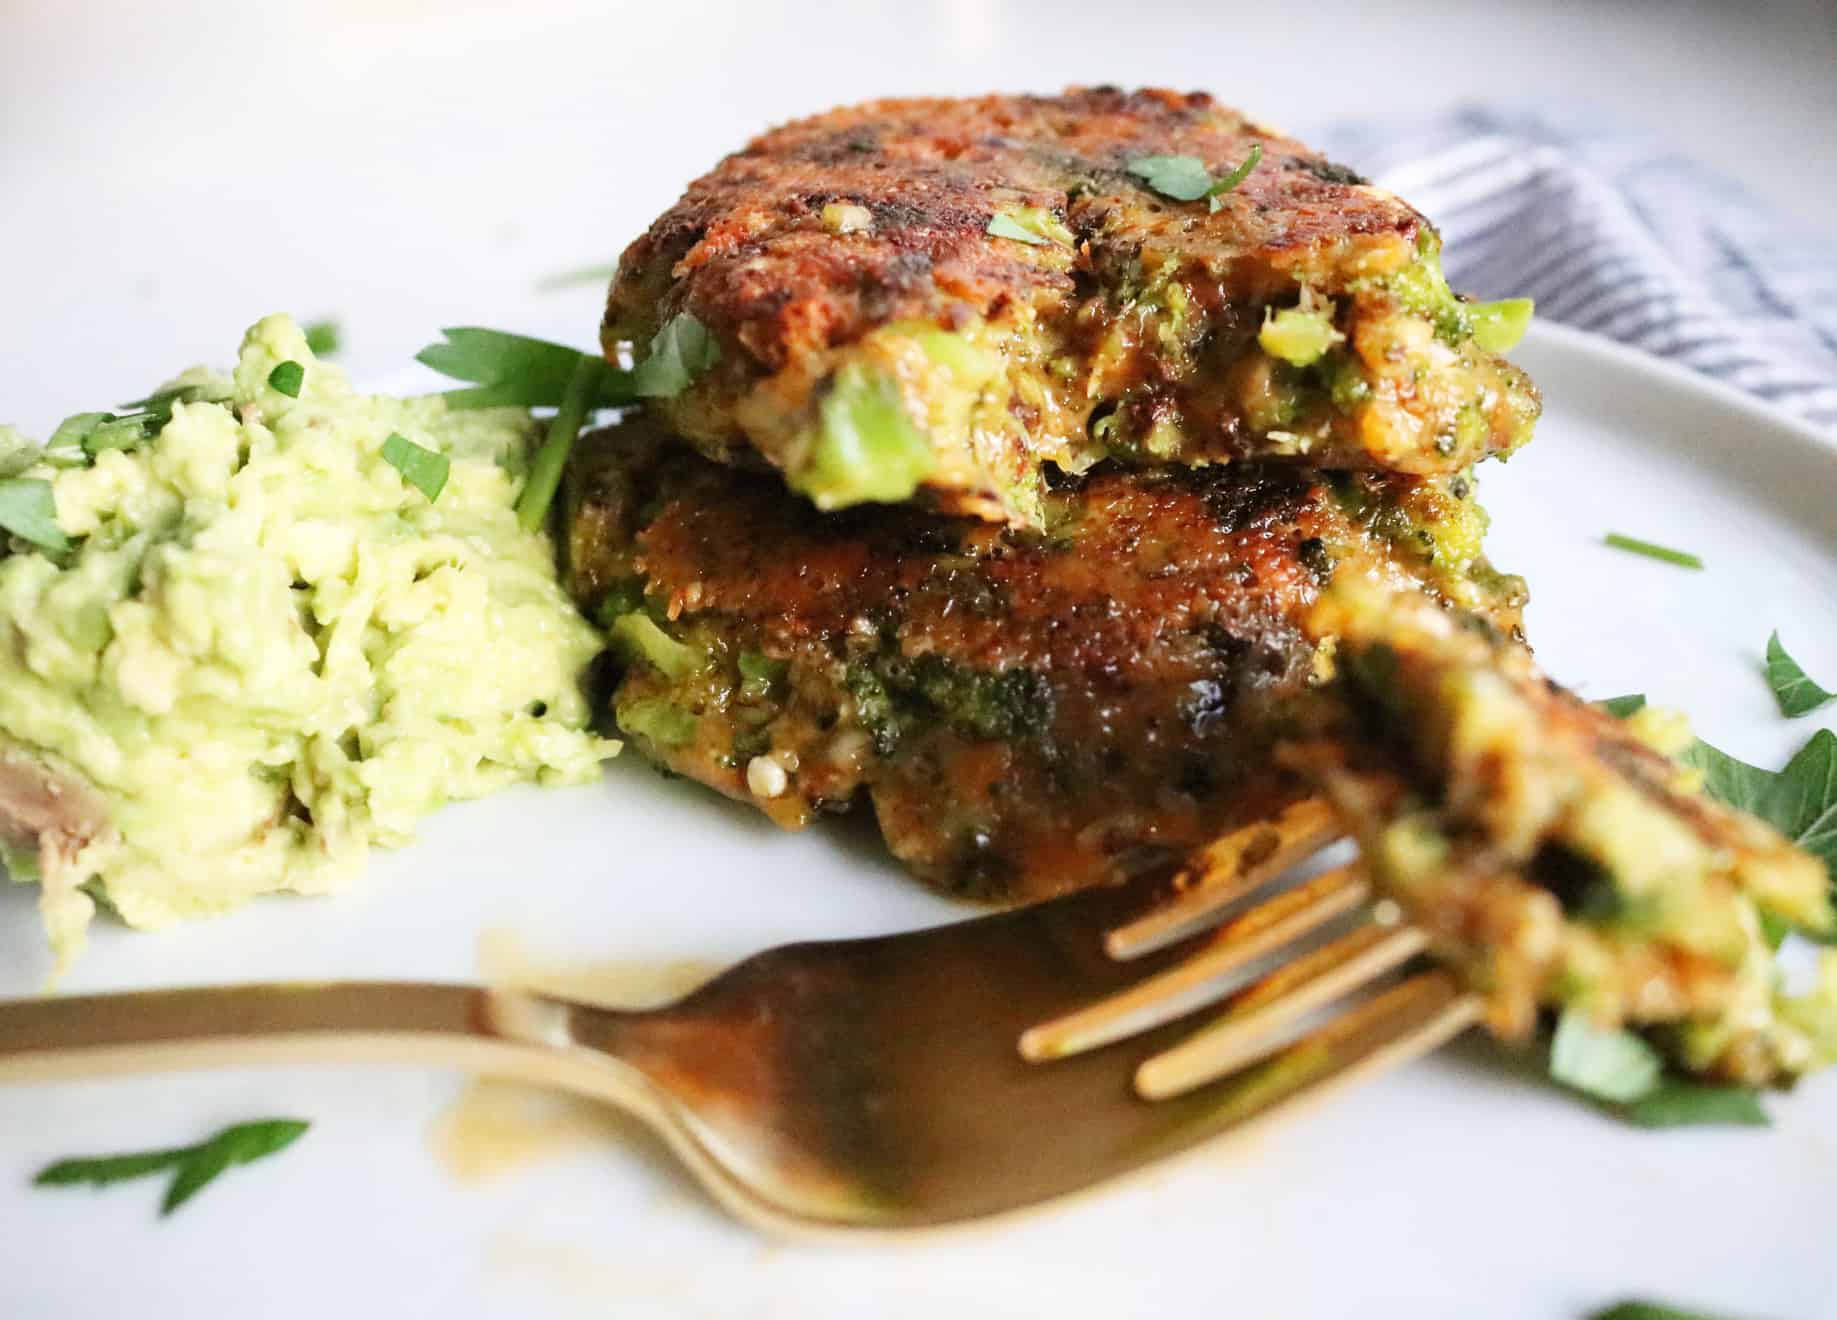 This is a side view of Broccoli Cheddar Patties. The two patties are stacked on top of each other and a bite is taken out of the top patty. A gold fork is blurred in the foreground with the bite of the broccoli patty. The patties sit on a white plate with smashed avocado off to the side. The plate sits on a white surface with a grey pinstripe tea towel underneath. 